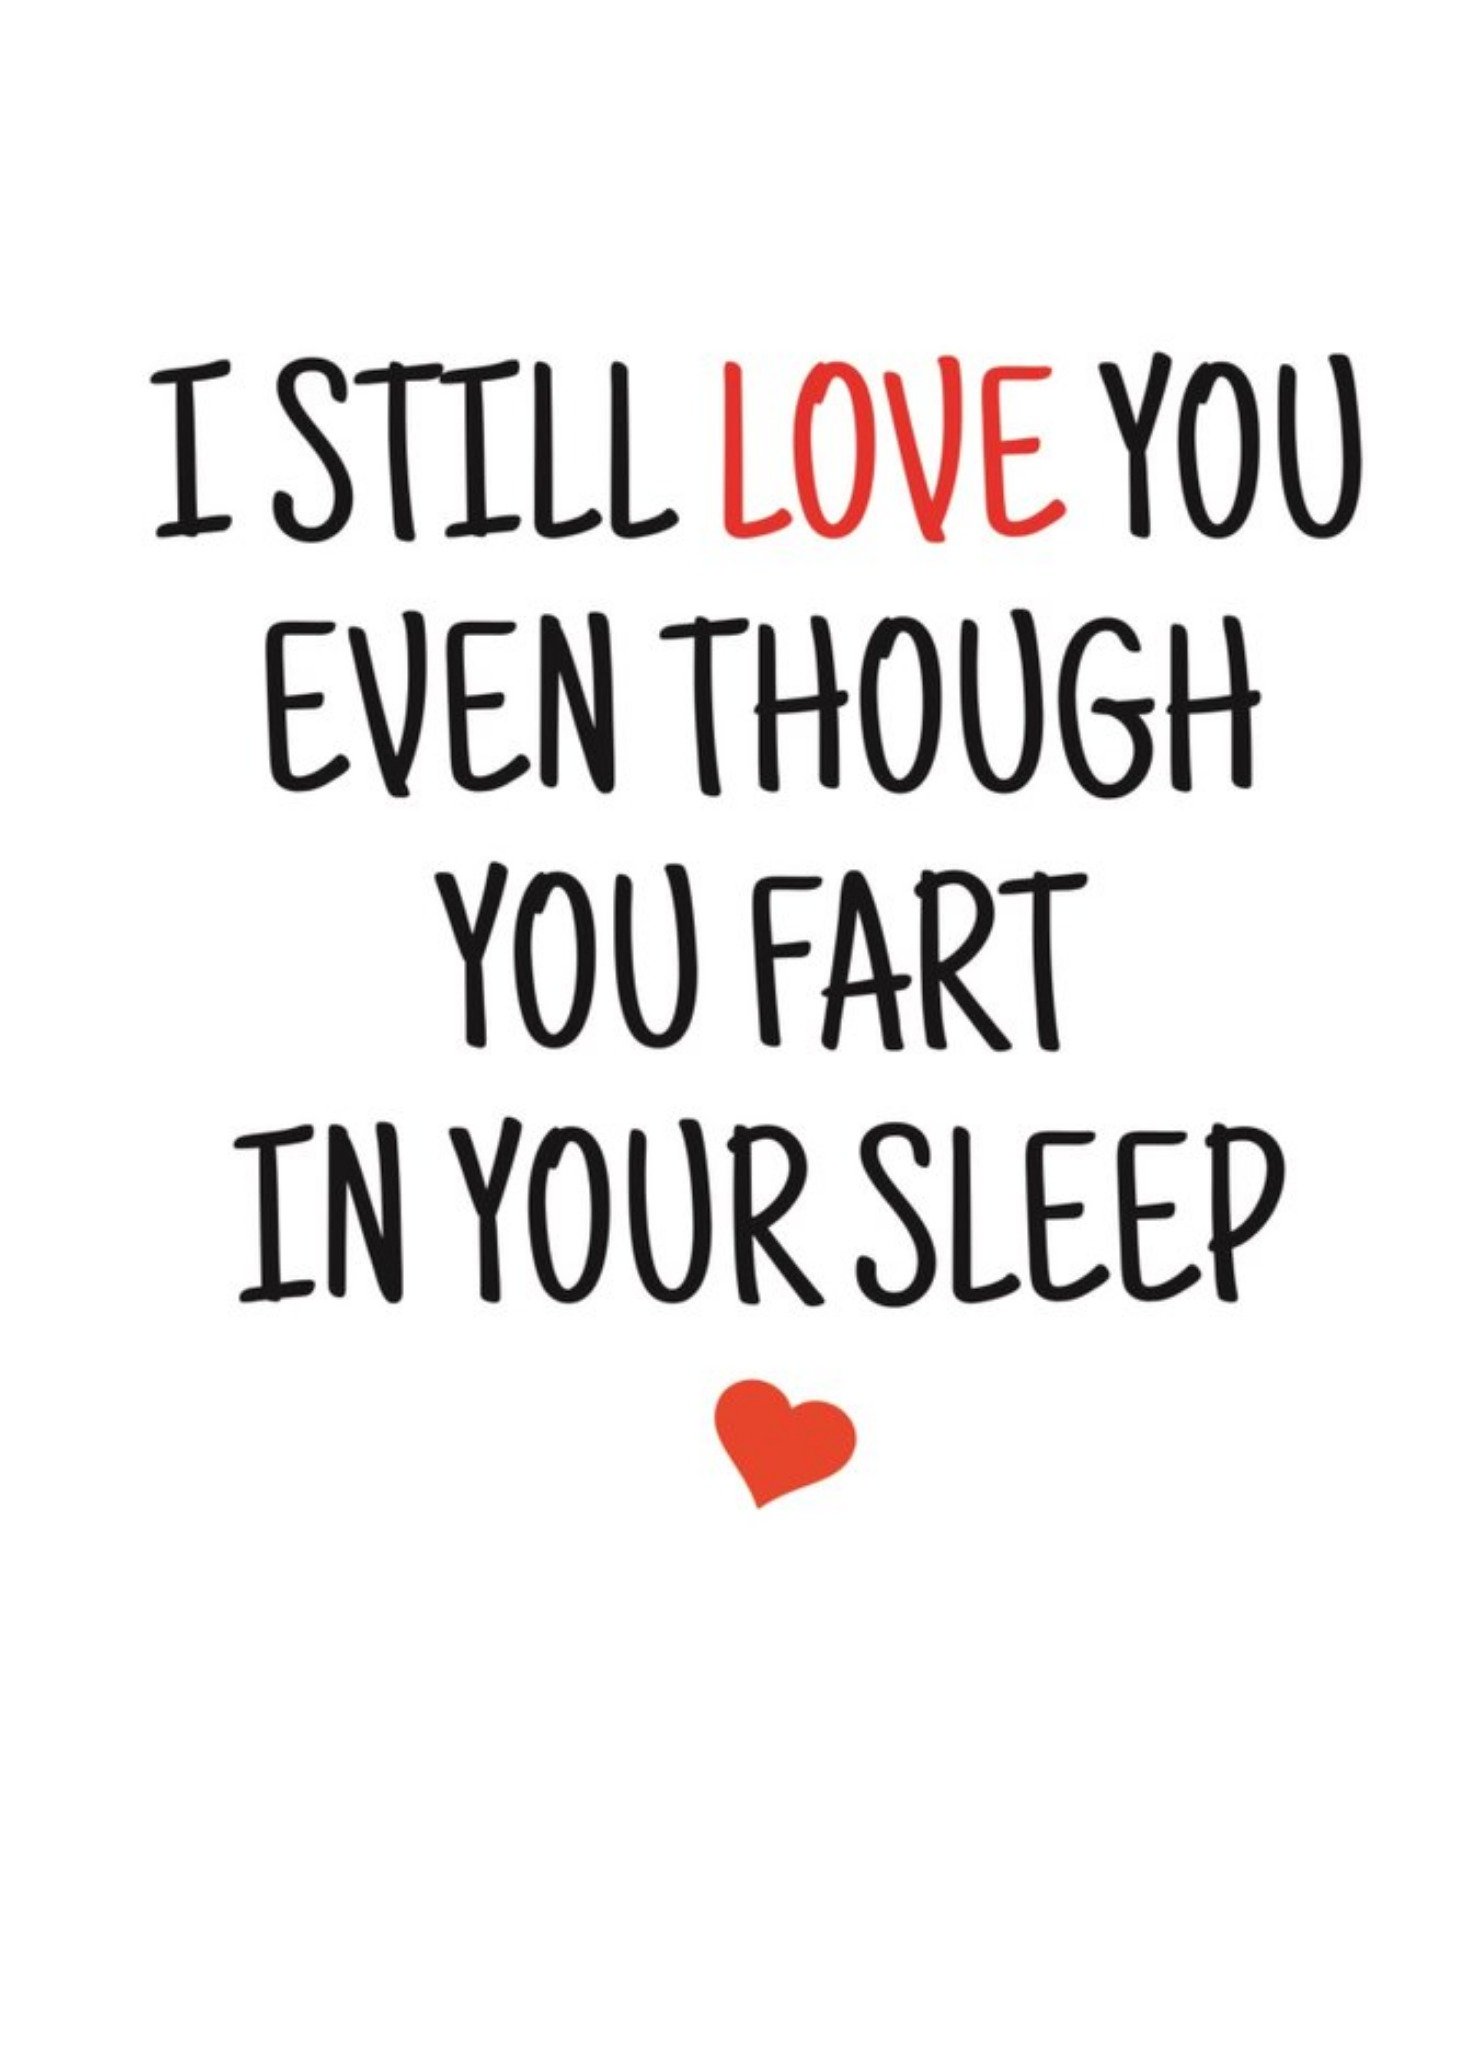 Banter King Typographical I Still Love You Even Though You Fart In Your Sleep Valentines Day Card, L